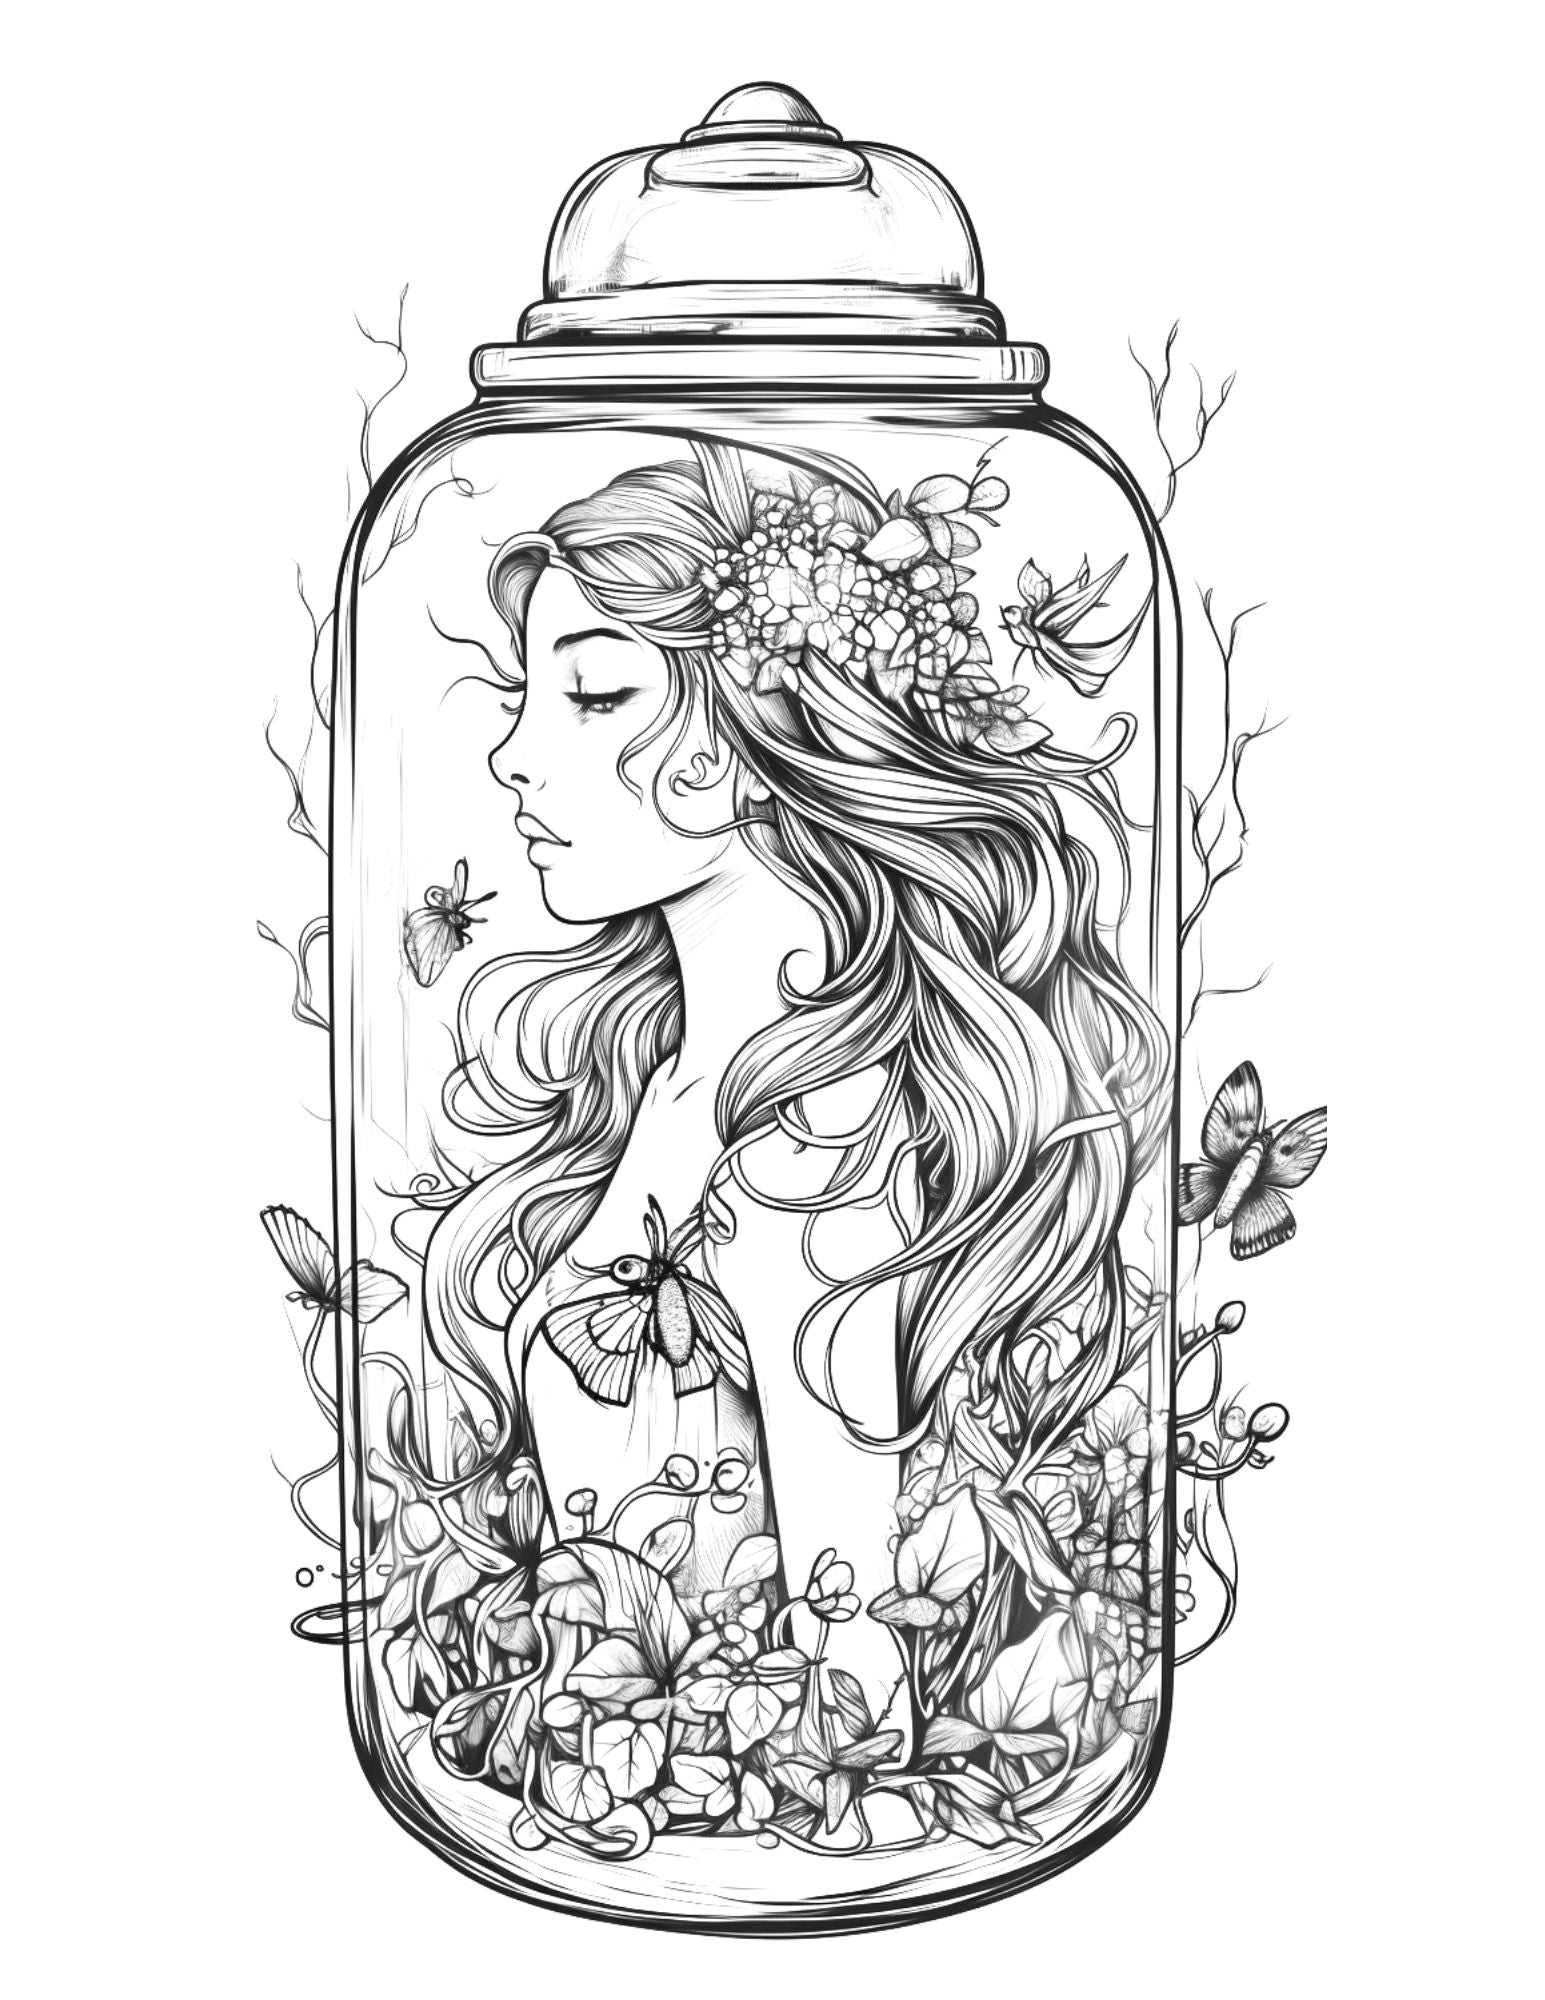 Fairy Girl in Jar Coloring Pages for Adults, Free Printable PDF Instant Download - raspiee